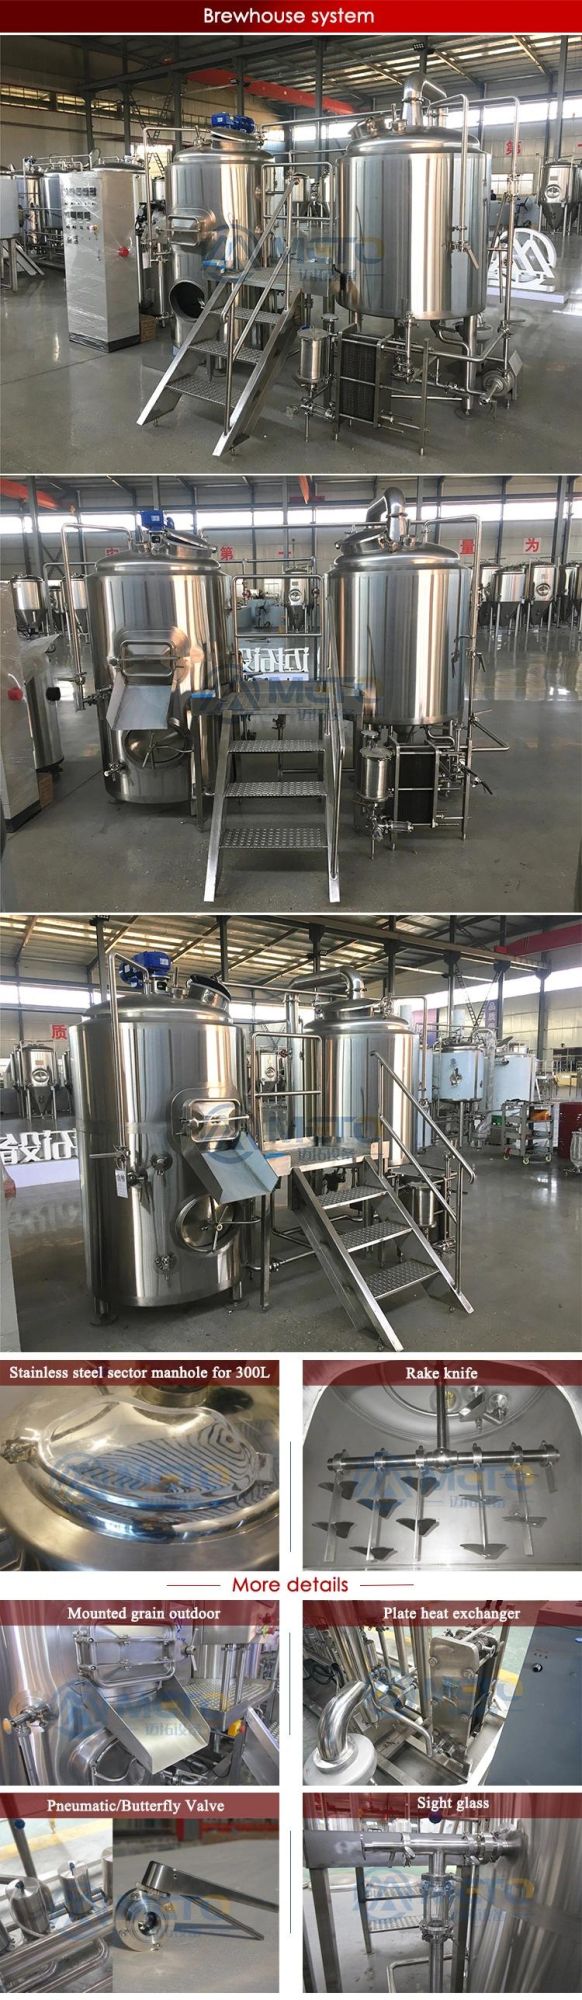 300L Manufacture Supplied Craft Beer Brewing System with Ce Certificate